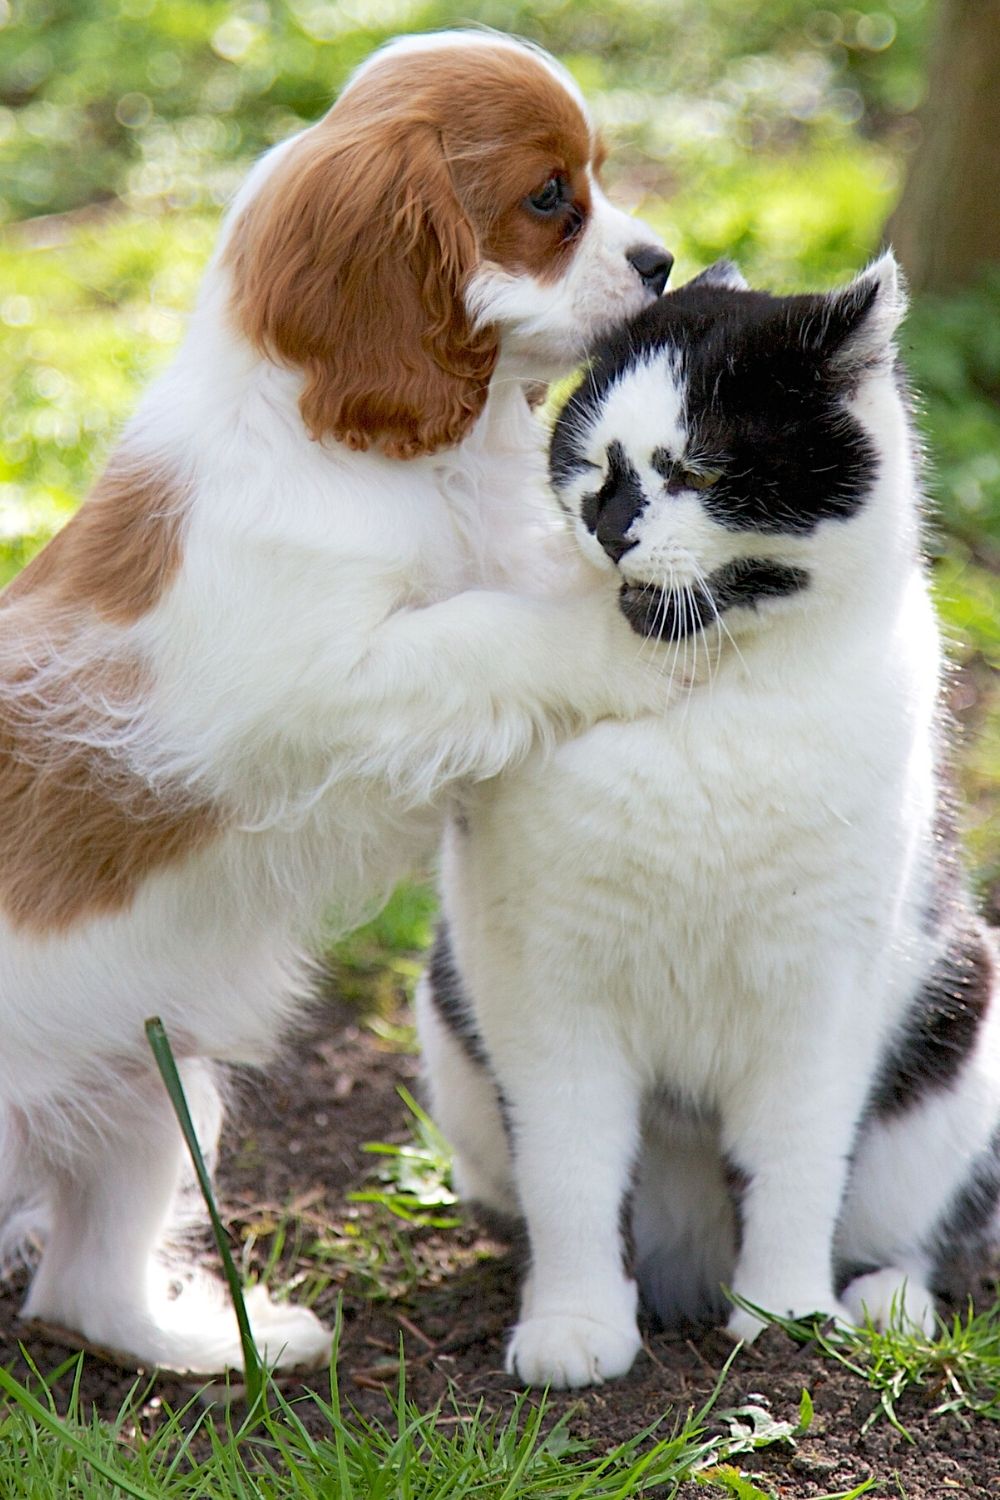 Dogs can sometimes forcefully (though unintentional) lick a cat's ear, which can cause ear canal damage